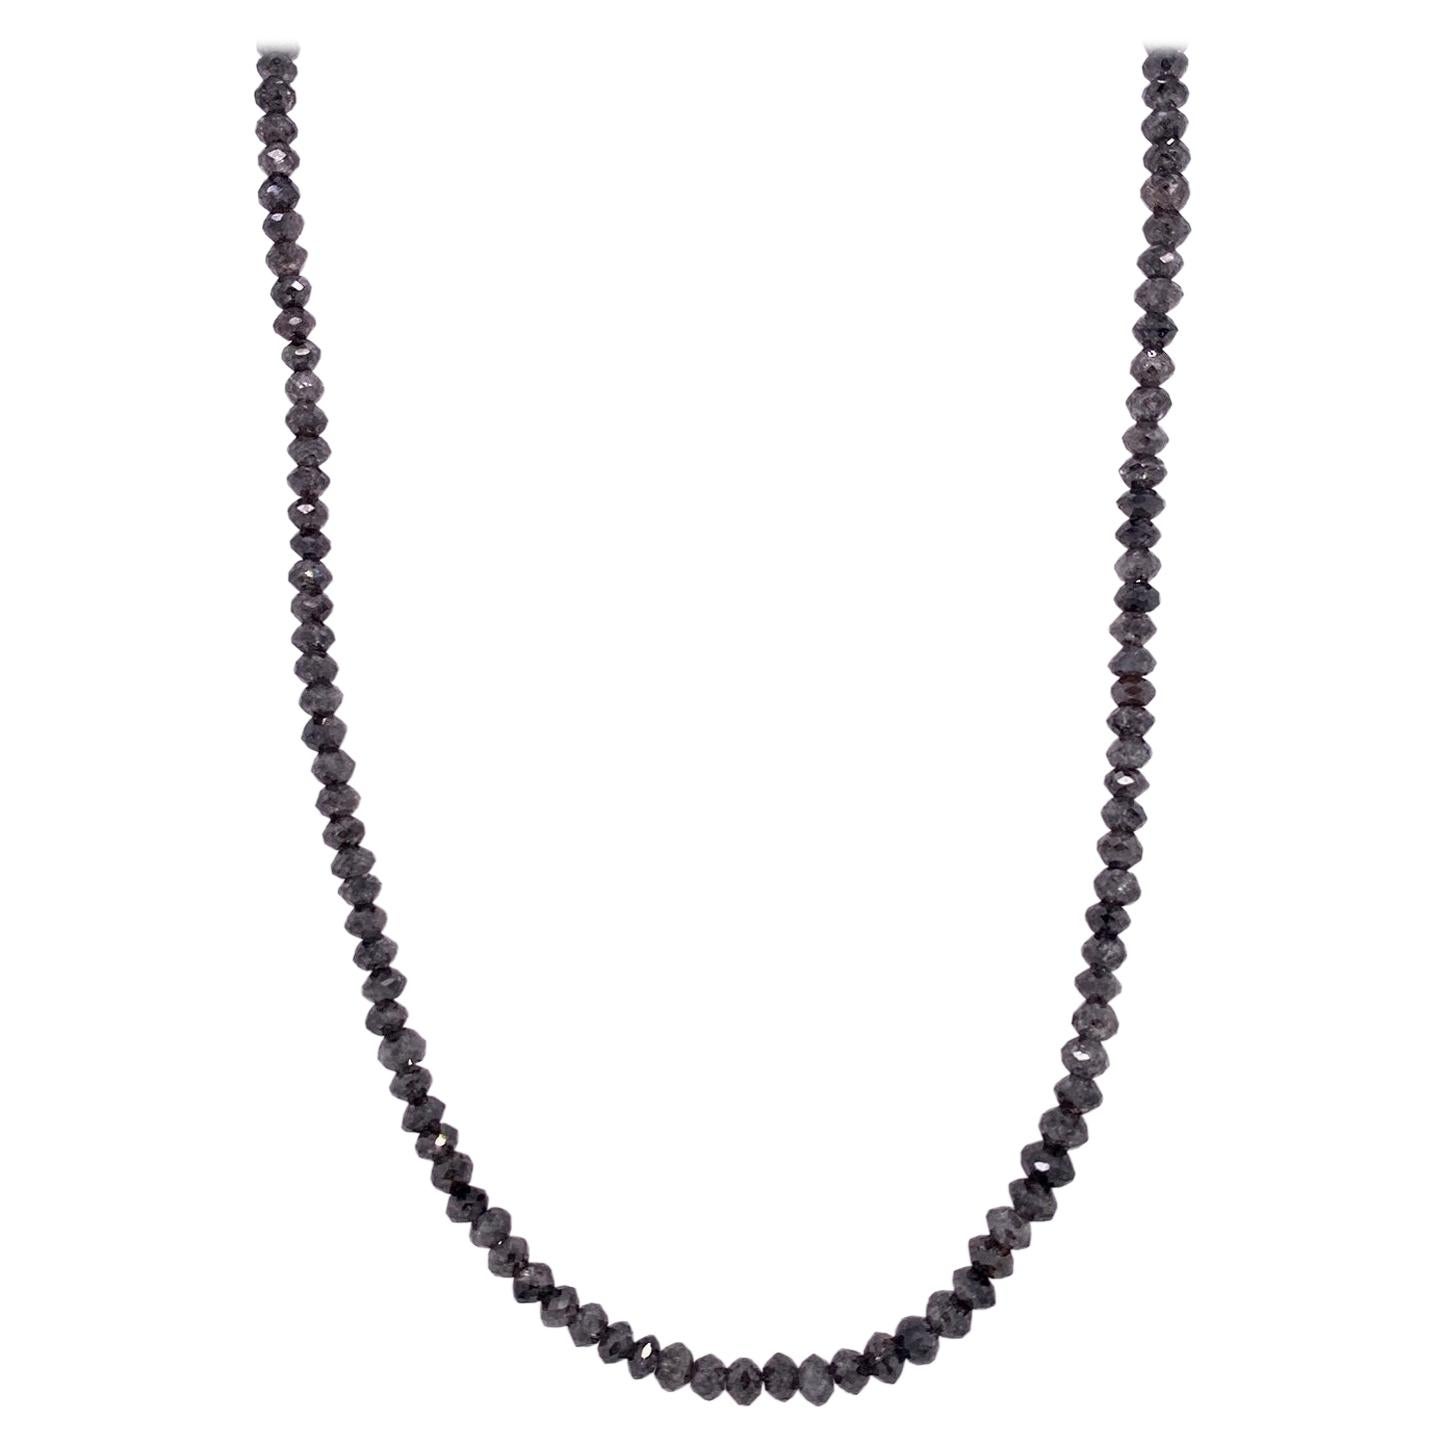 Steel Grey Diamond Necklace with White Gold Clasp